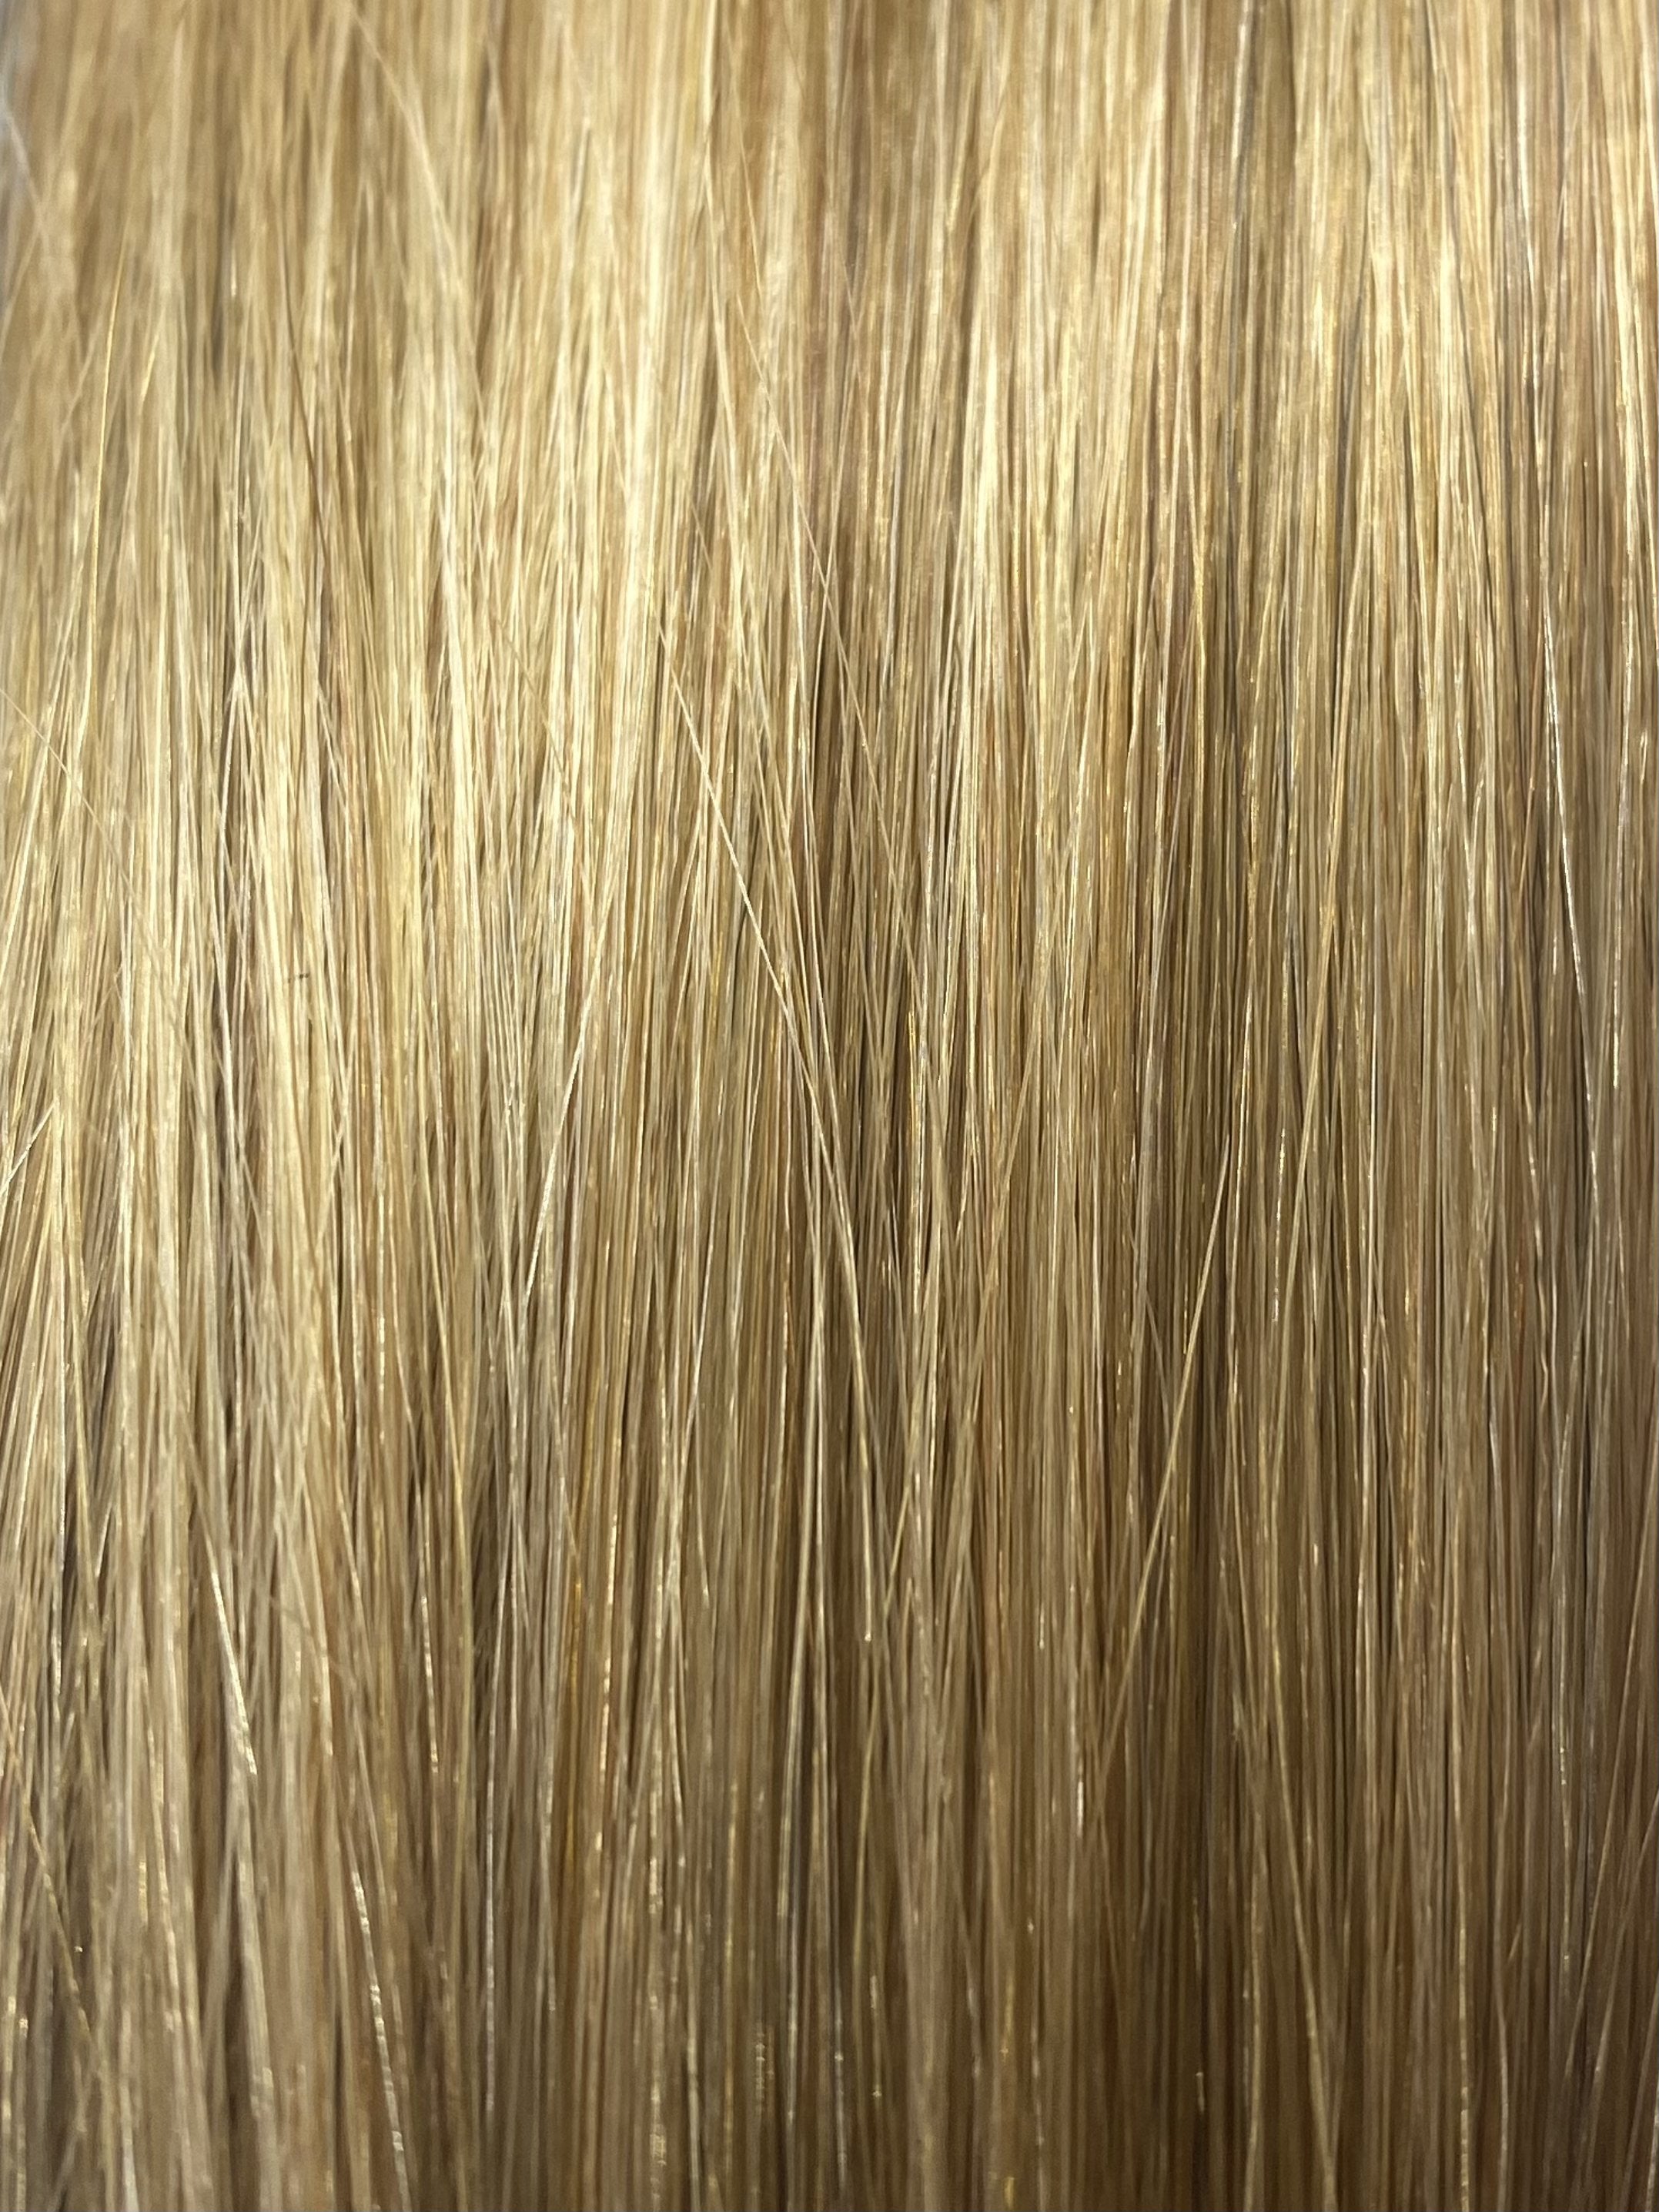 FUSION HIGHLIGHT #12/DB2 LIGHT/COPPER GOLDEN BLONDE 40CM/ 16 INCHES  - 17.5 GRAMS - Image 1